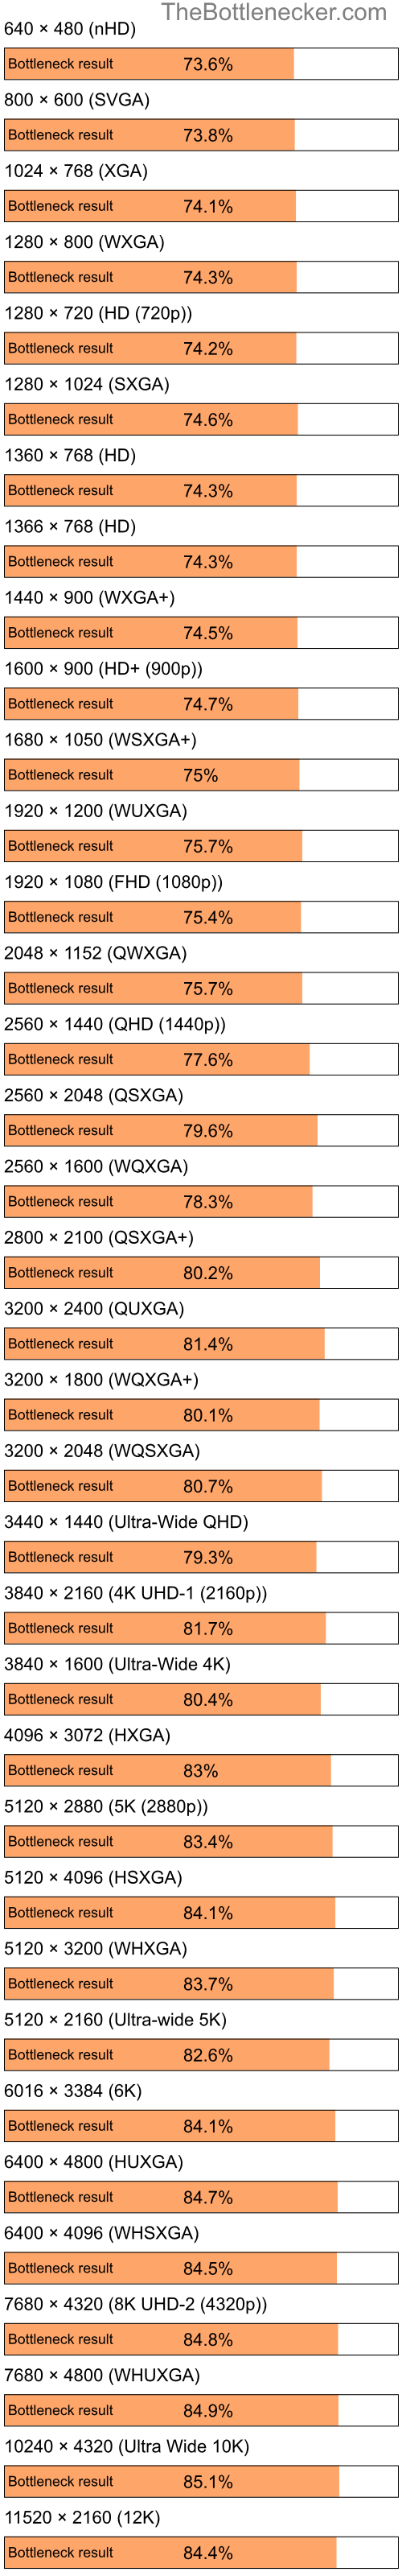 Bottleneck results by resolution for Intel Pentium 4 and NVIDIA GeForce 7300 LE in Graphic Card Intense Tasks